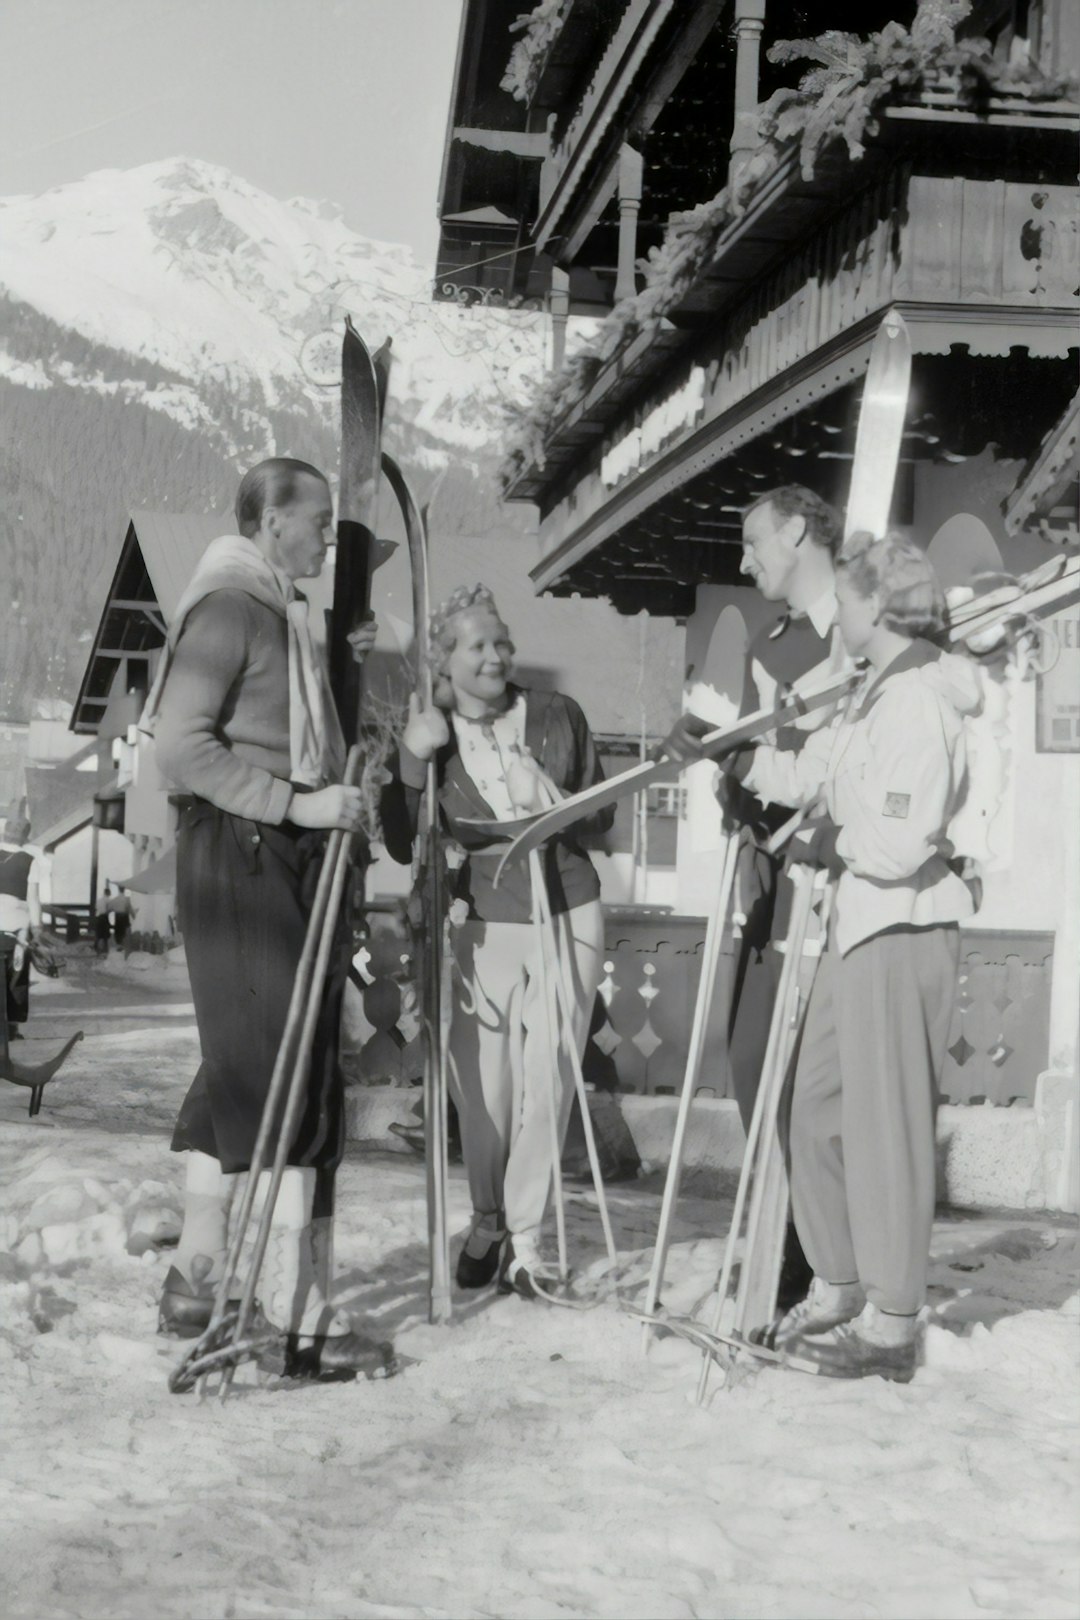 People with skis in front of the hotel, 1940